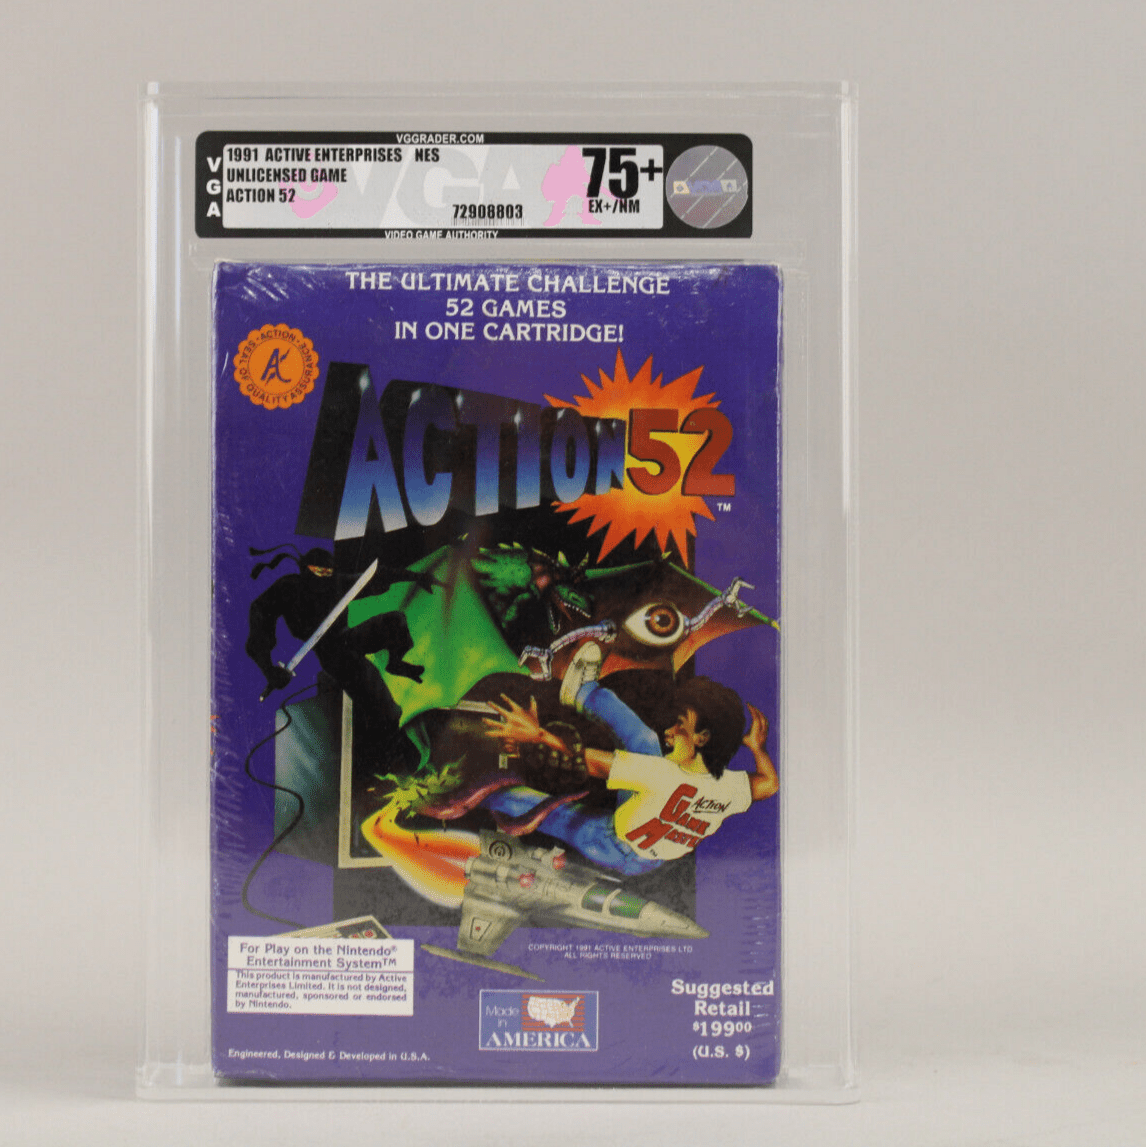 Action 52 Nintendo NES 1991 Active Ent. New Factory Sealed VGA Graded 75+ EX+/NM